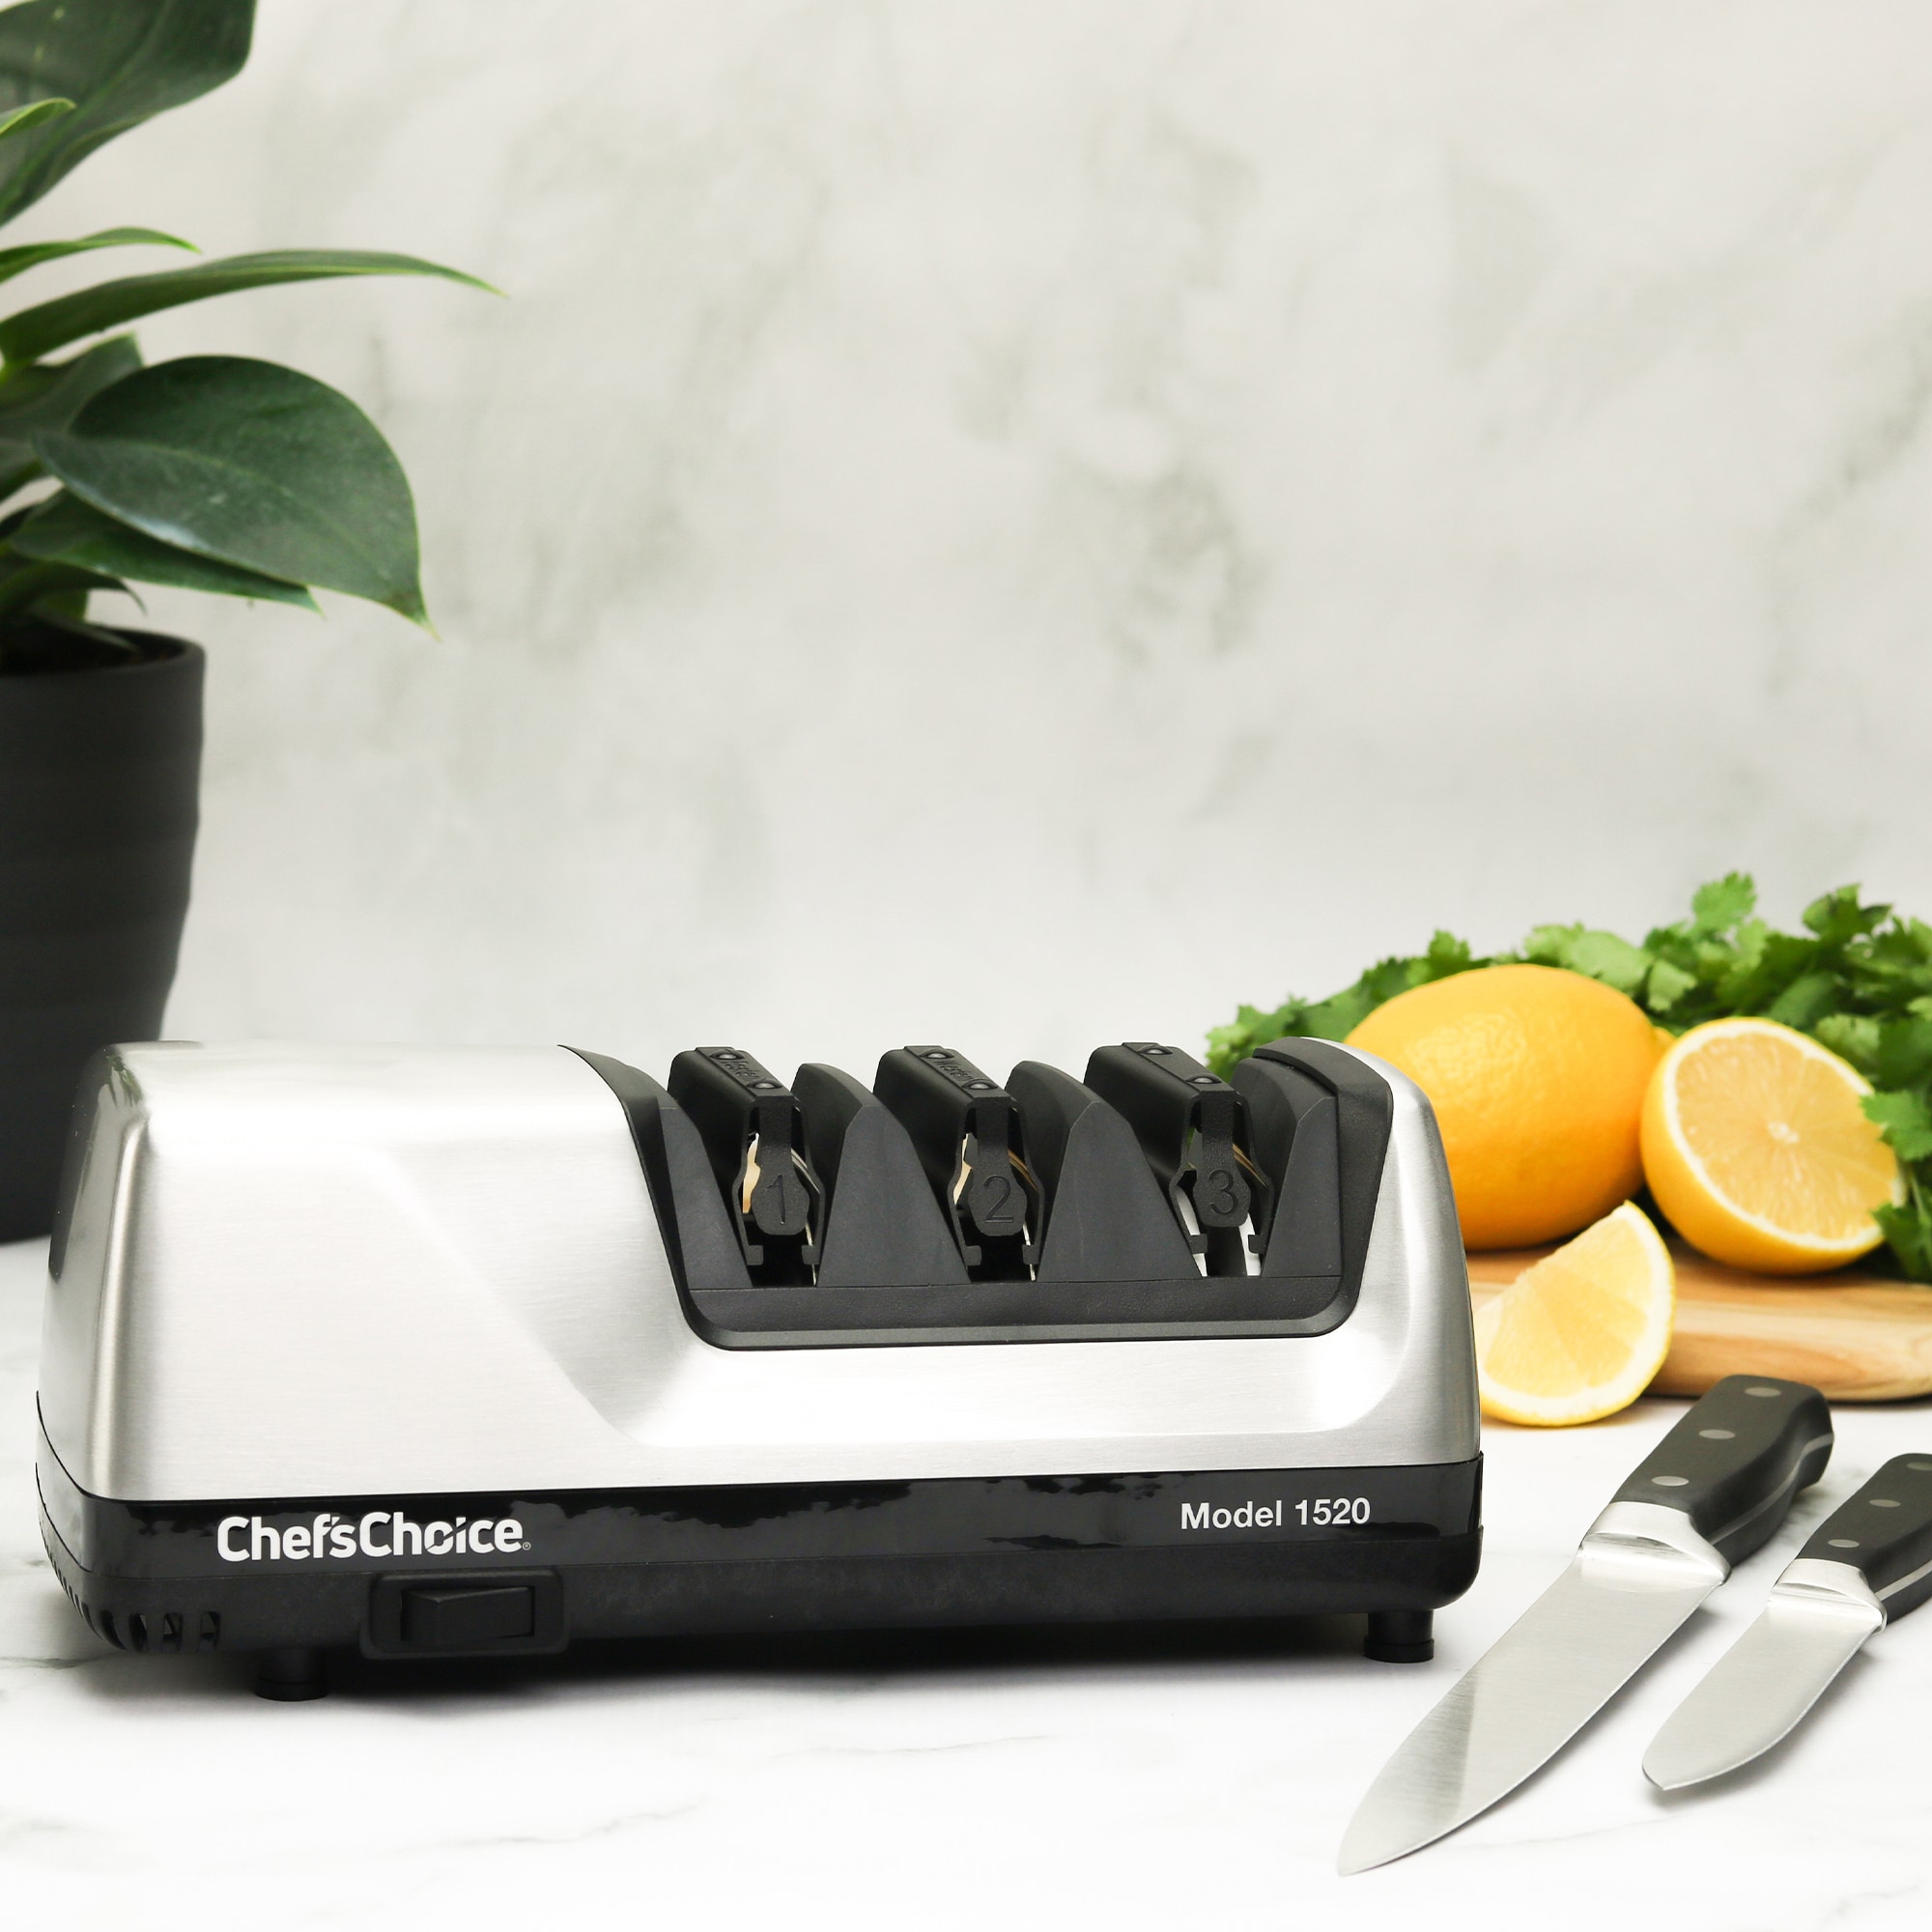  Chef'sChoice 15XV EdgeSelect Professional Electric Knife  Sharpener with 100-Percent Diamond Abrasives and Precision Angle Guides for  Straight Edge and Serrated Knives, 3-Stage, Gray: Chefs Choice Edge Select:  Home & Kitchen